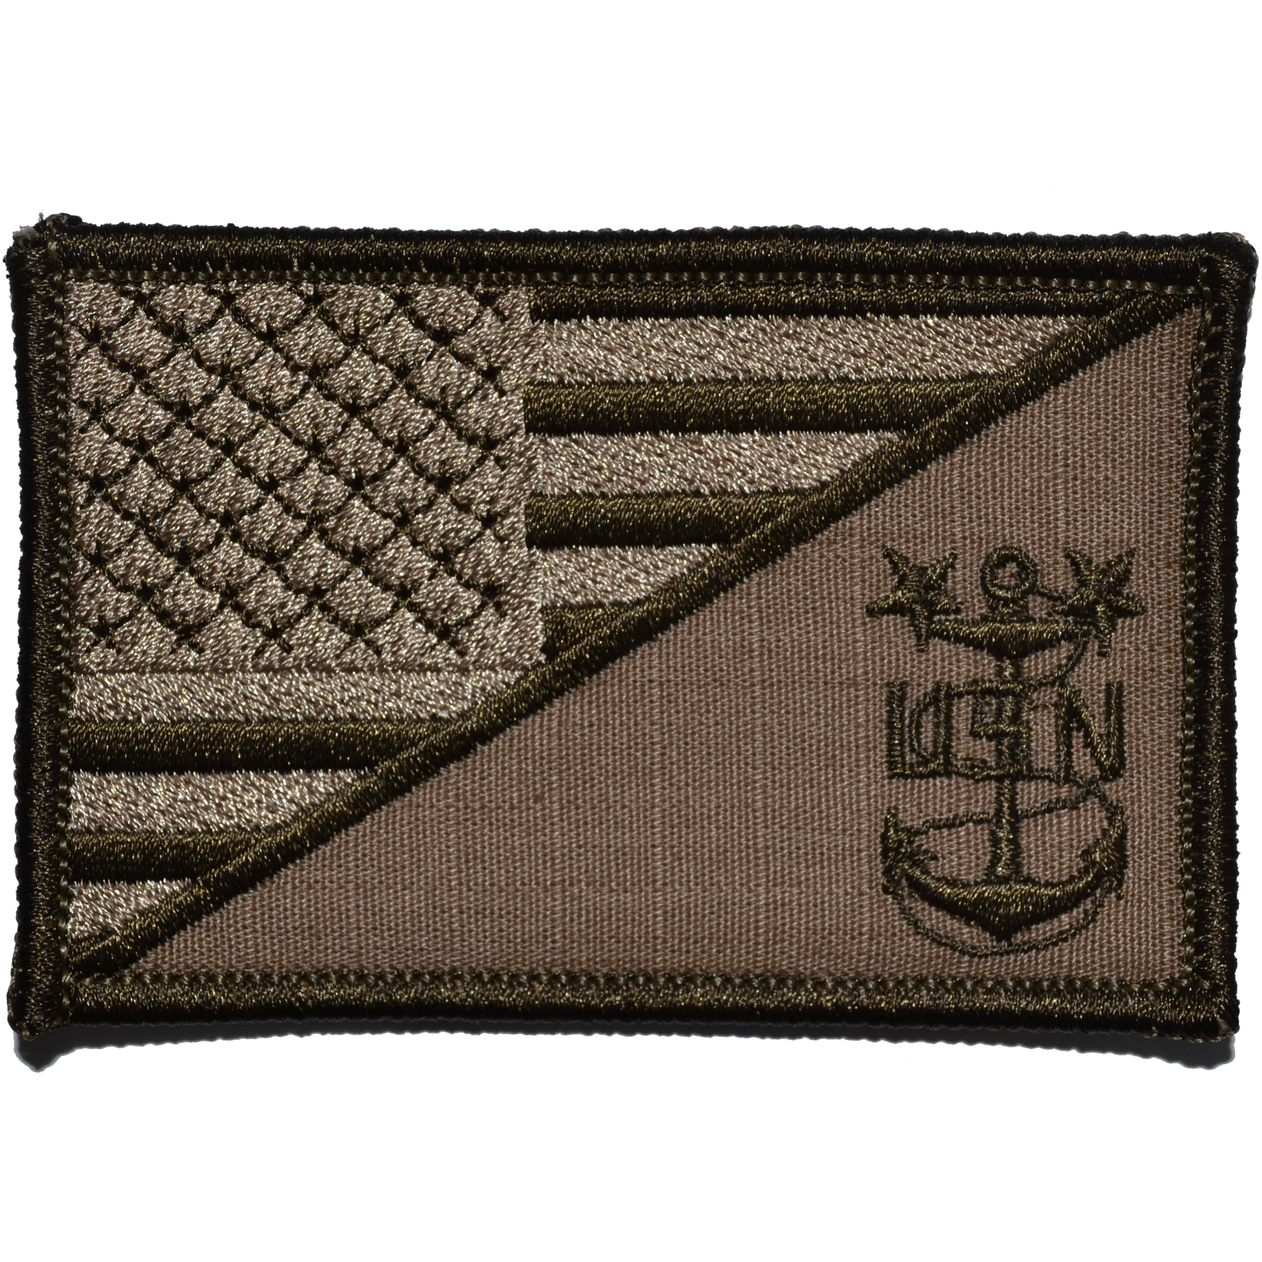 Tactical Gear Junkie Patches Coyote Brown Navy MCPO Master Chief Petty Officer USA Flag - 2.25x3.5 inch Patch